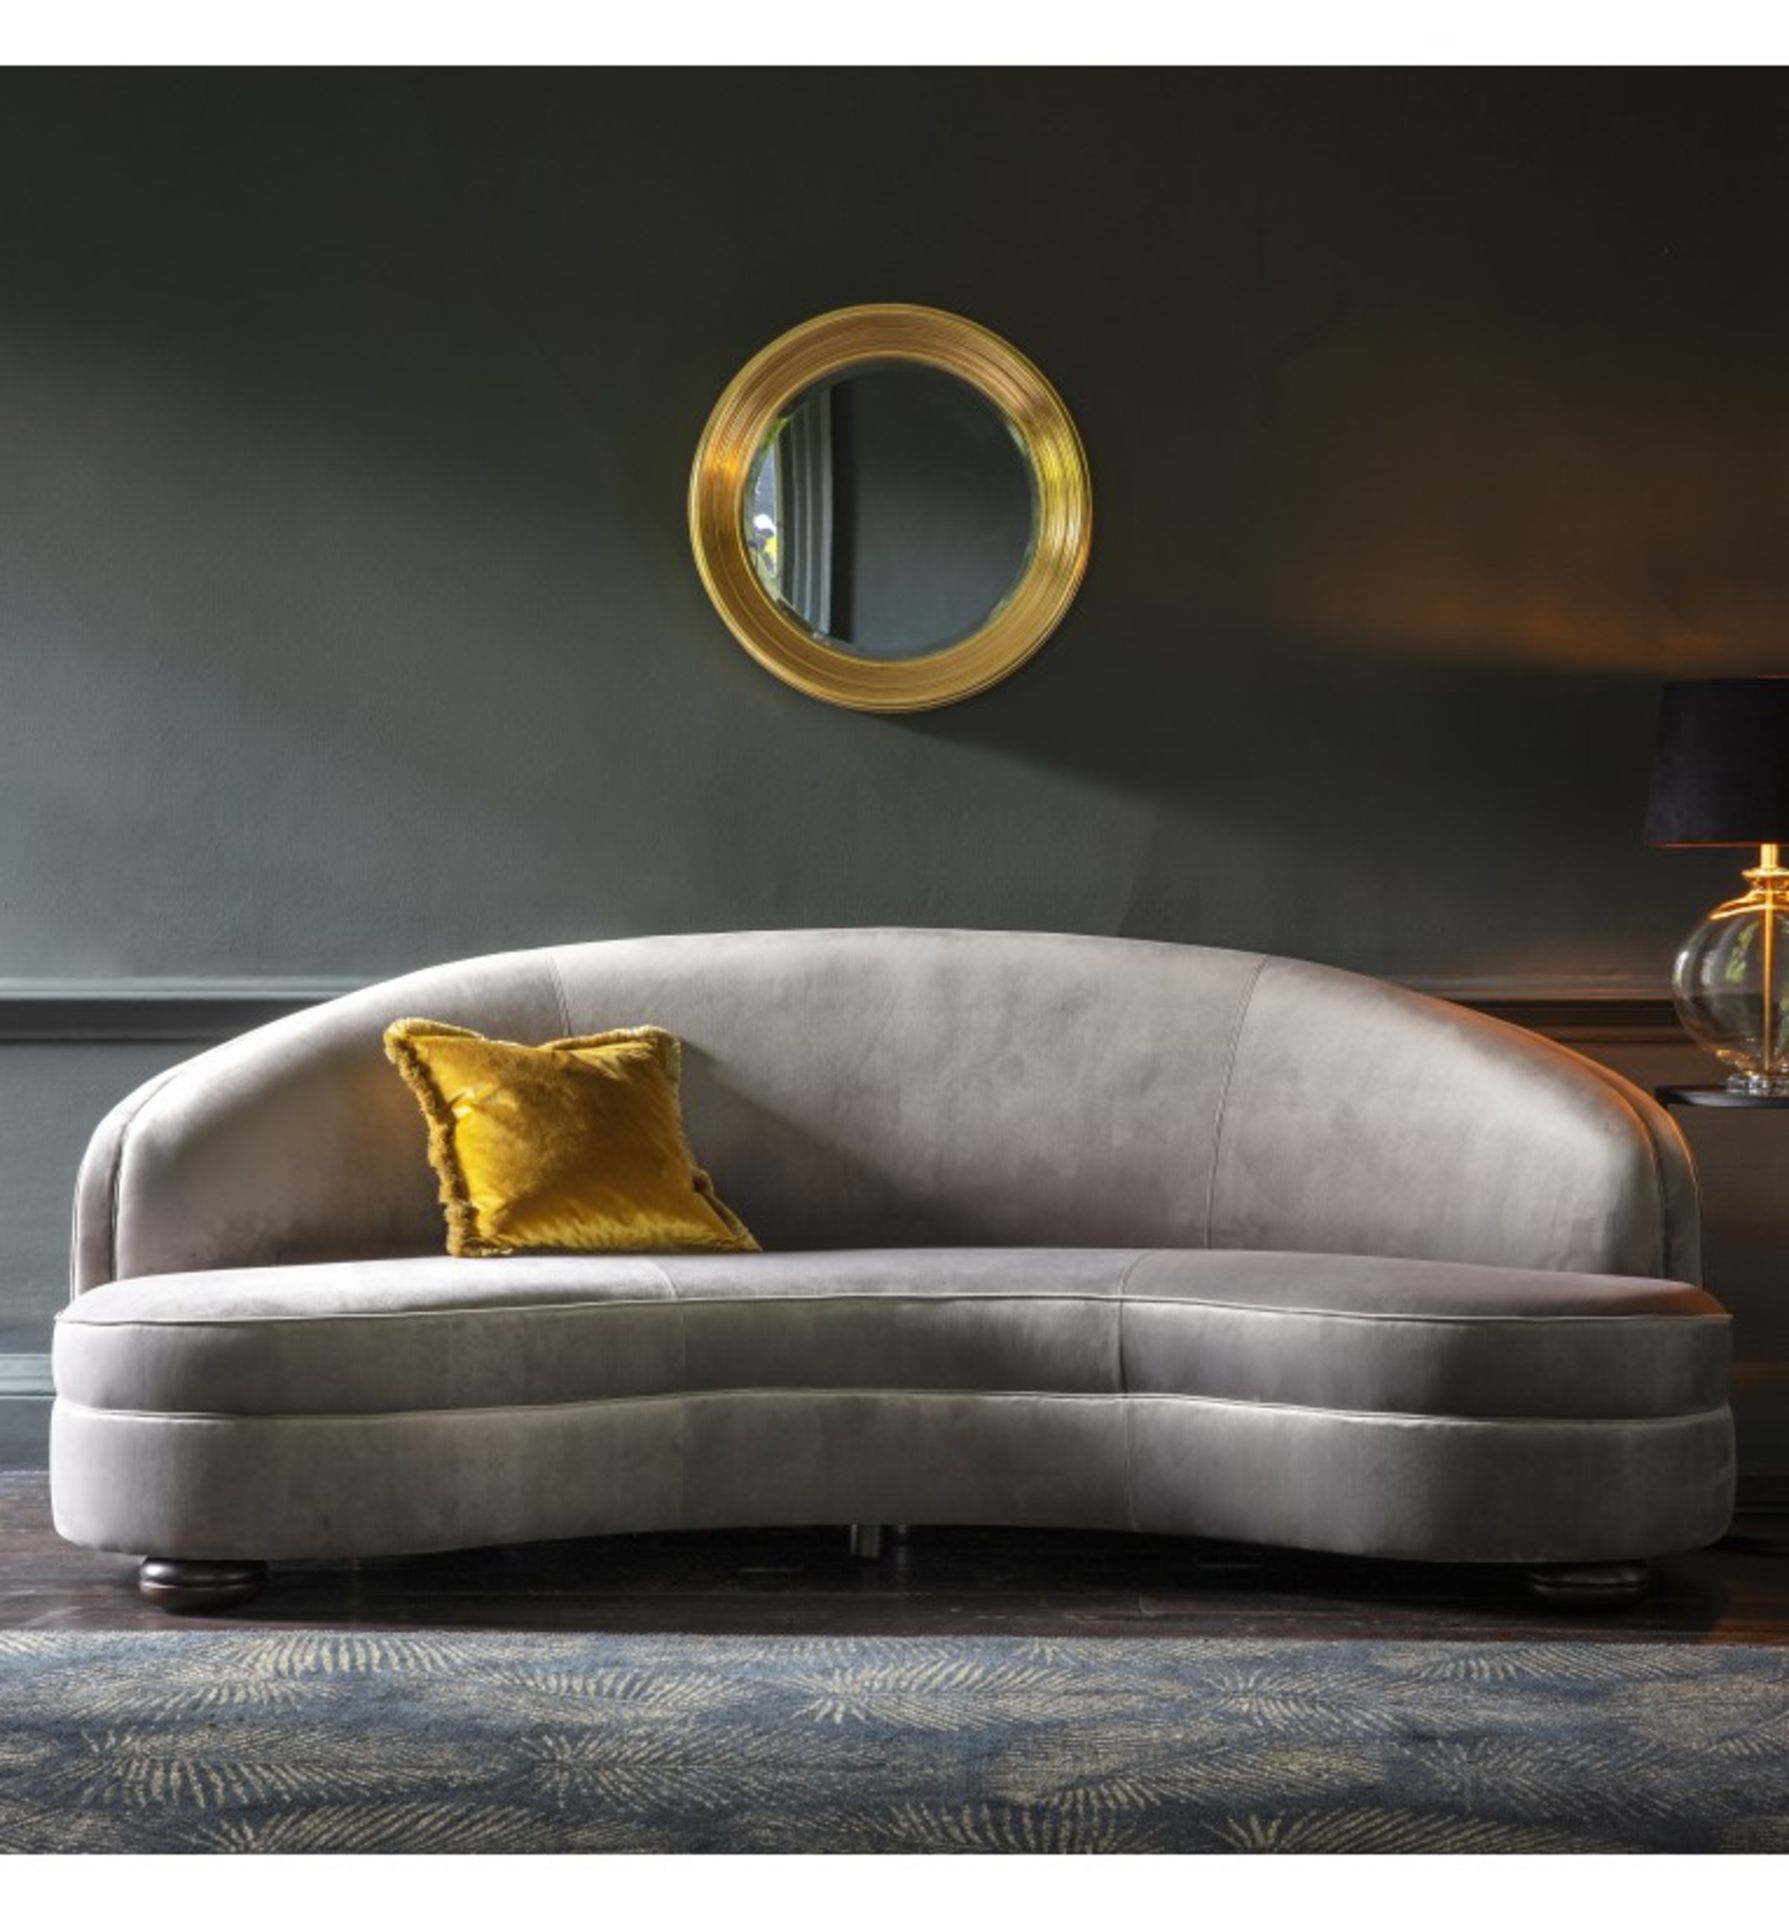 Sanza sofa Grey velvet 2290 x 1200 x 880mm The Sanza Sofa is the latest addition to our range of